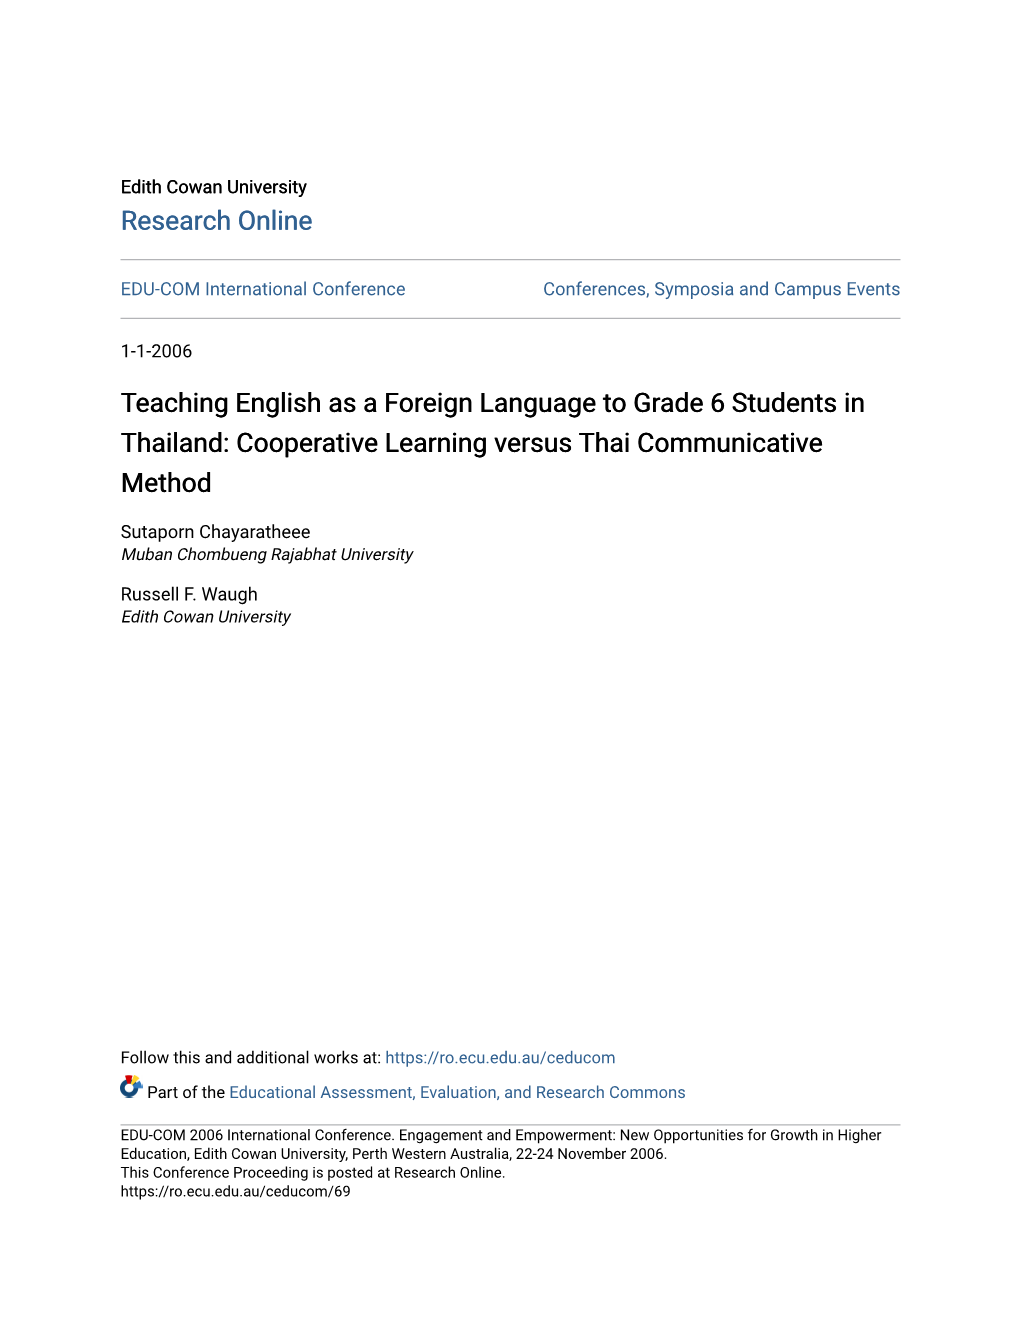 Teaching English As a Foreign Language to Grade 6 Students in Thailand: Cooperative Learning Versus Thai Communicative Method